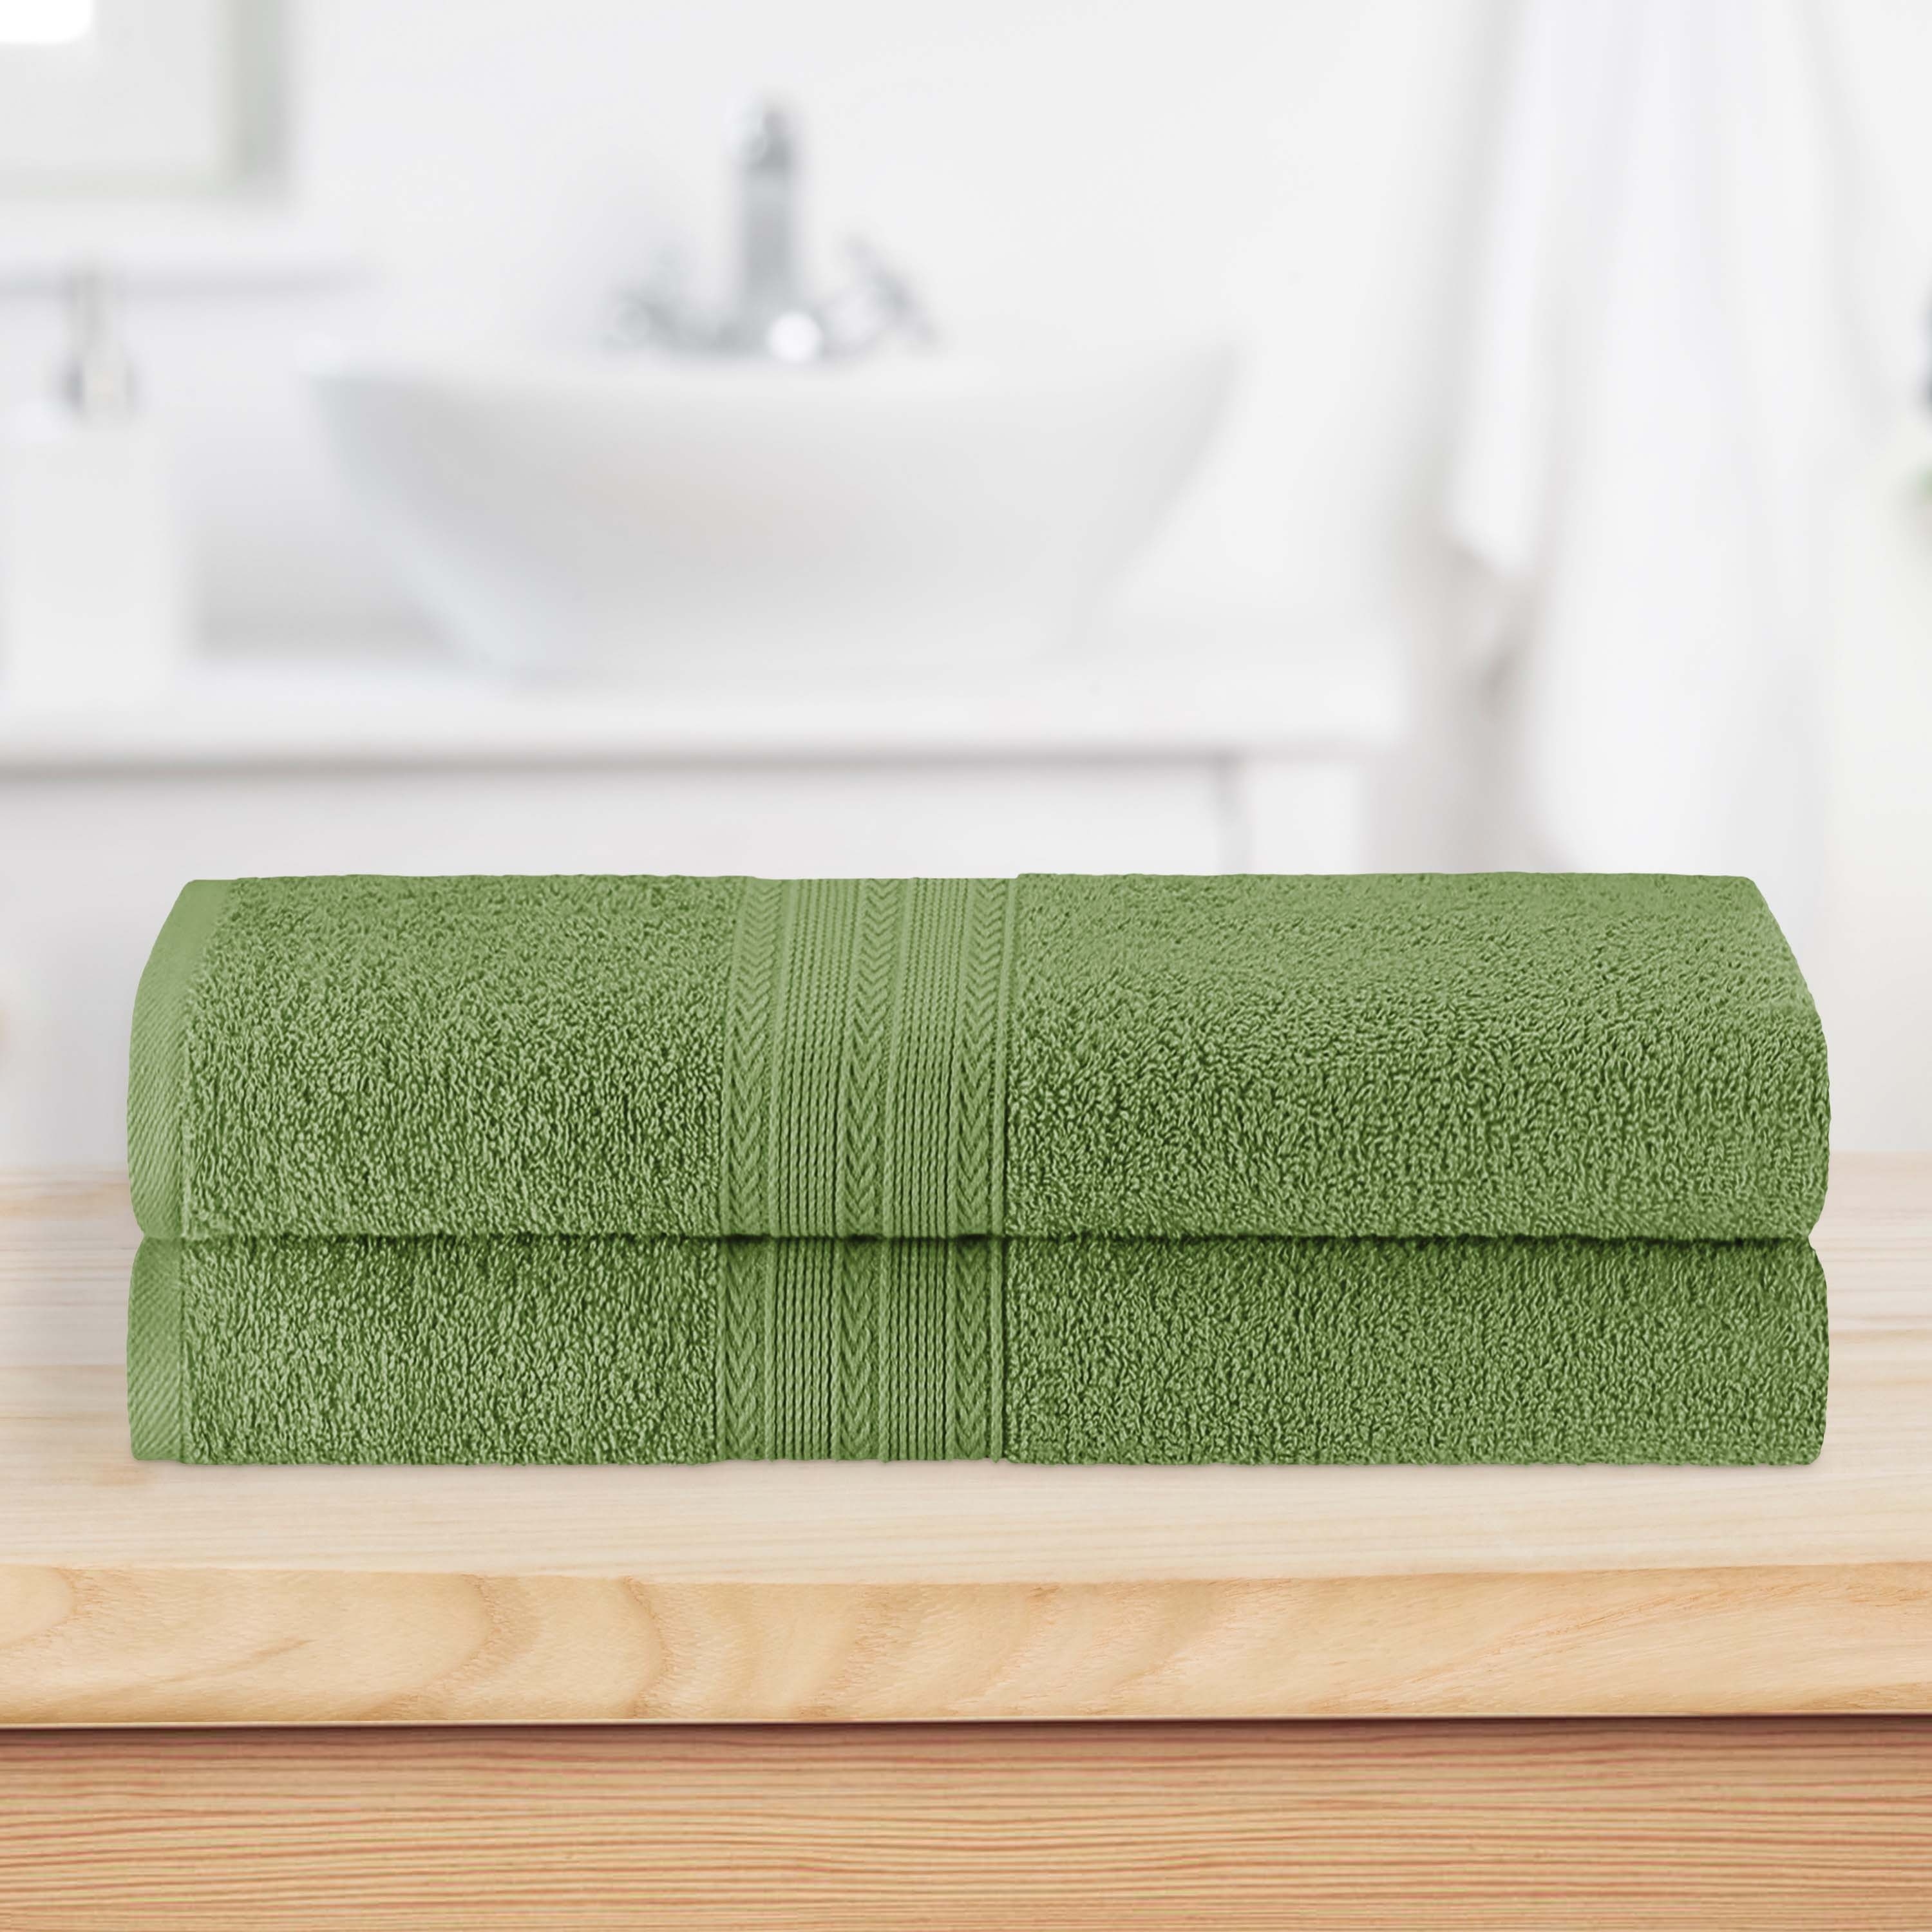 https://ak1.ostkcdn.com/images/products/is/images/direct/1a73e3c576efdf001b58ac90b7cf2d9ef4b422b6/Eco-Friendly-Sustainable-Cotton-Bath-Sheet-Set-of-2-by-Superior.jpg